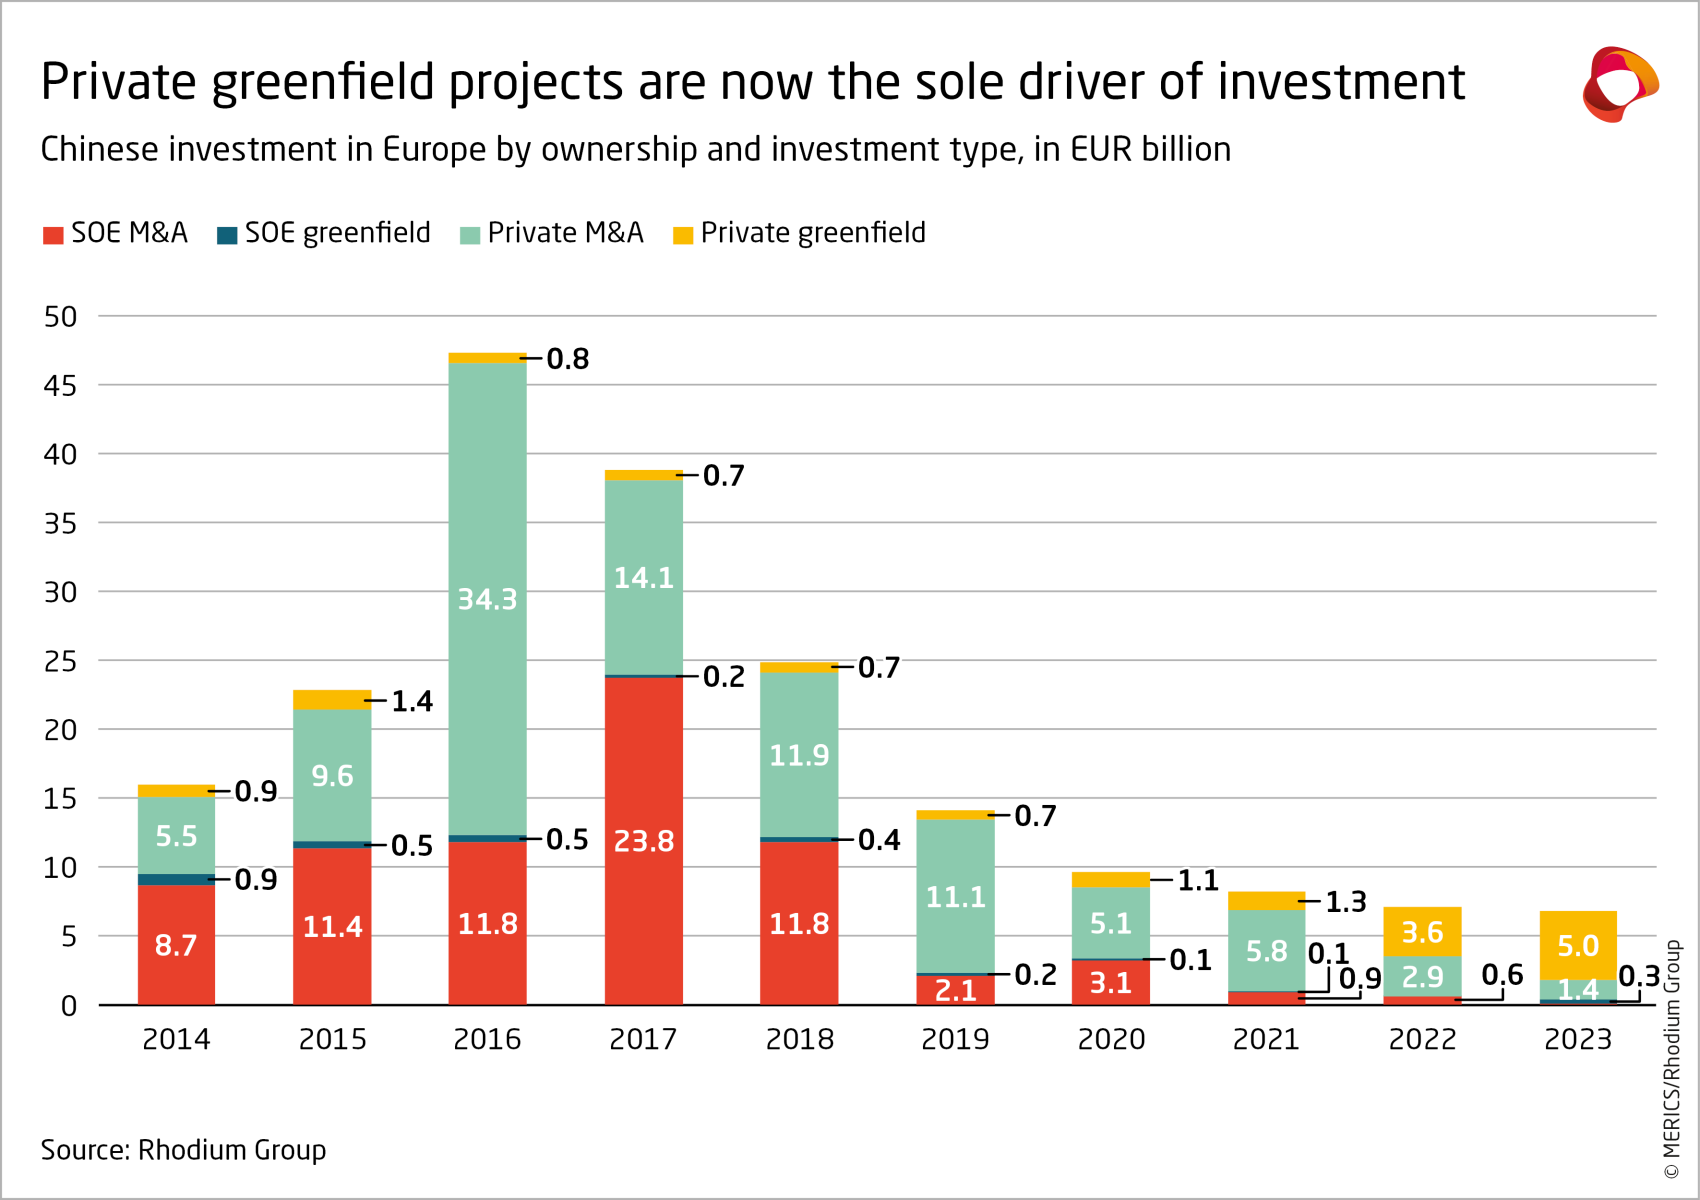 merics-rhodium-group-chinese-fdi-in-europe-2023-private-greenfield-projects-chinese-investment-by-ownership-investment-type-annex-1.png